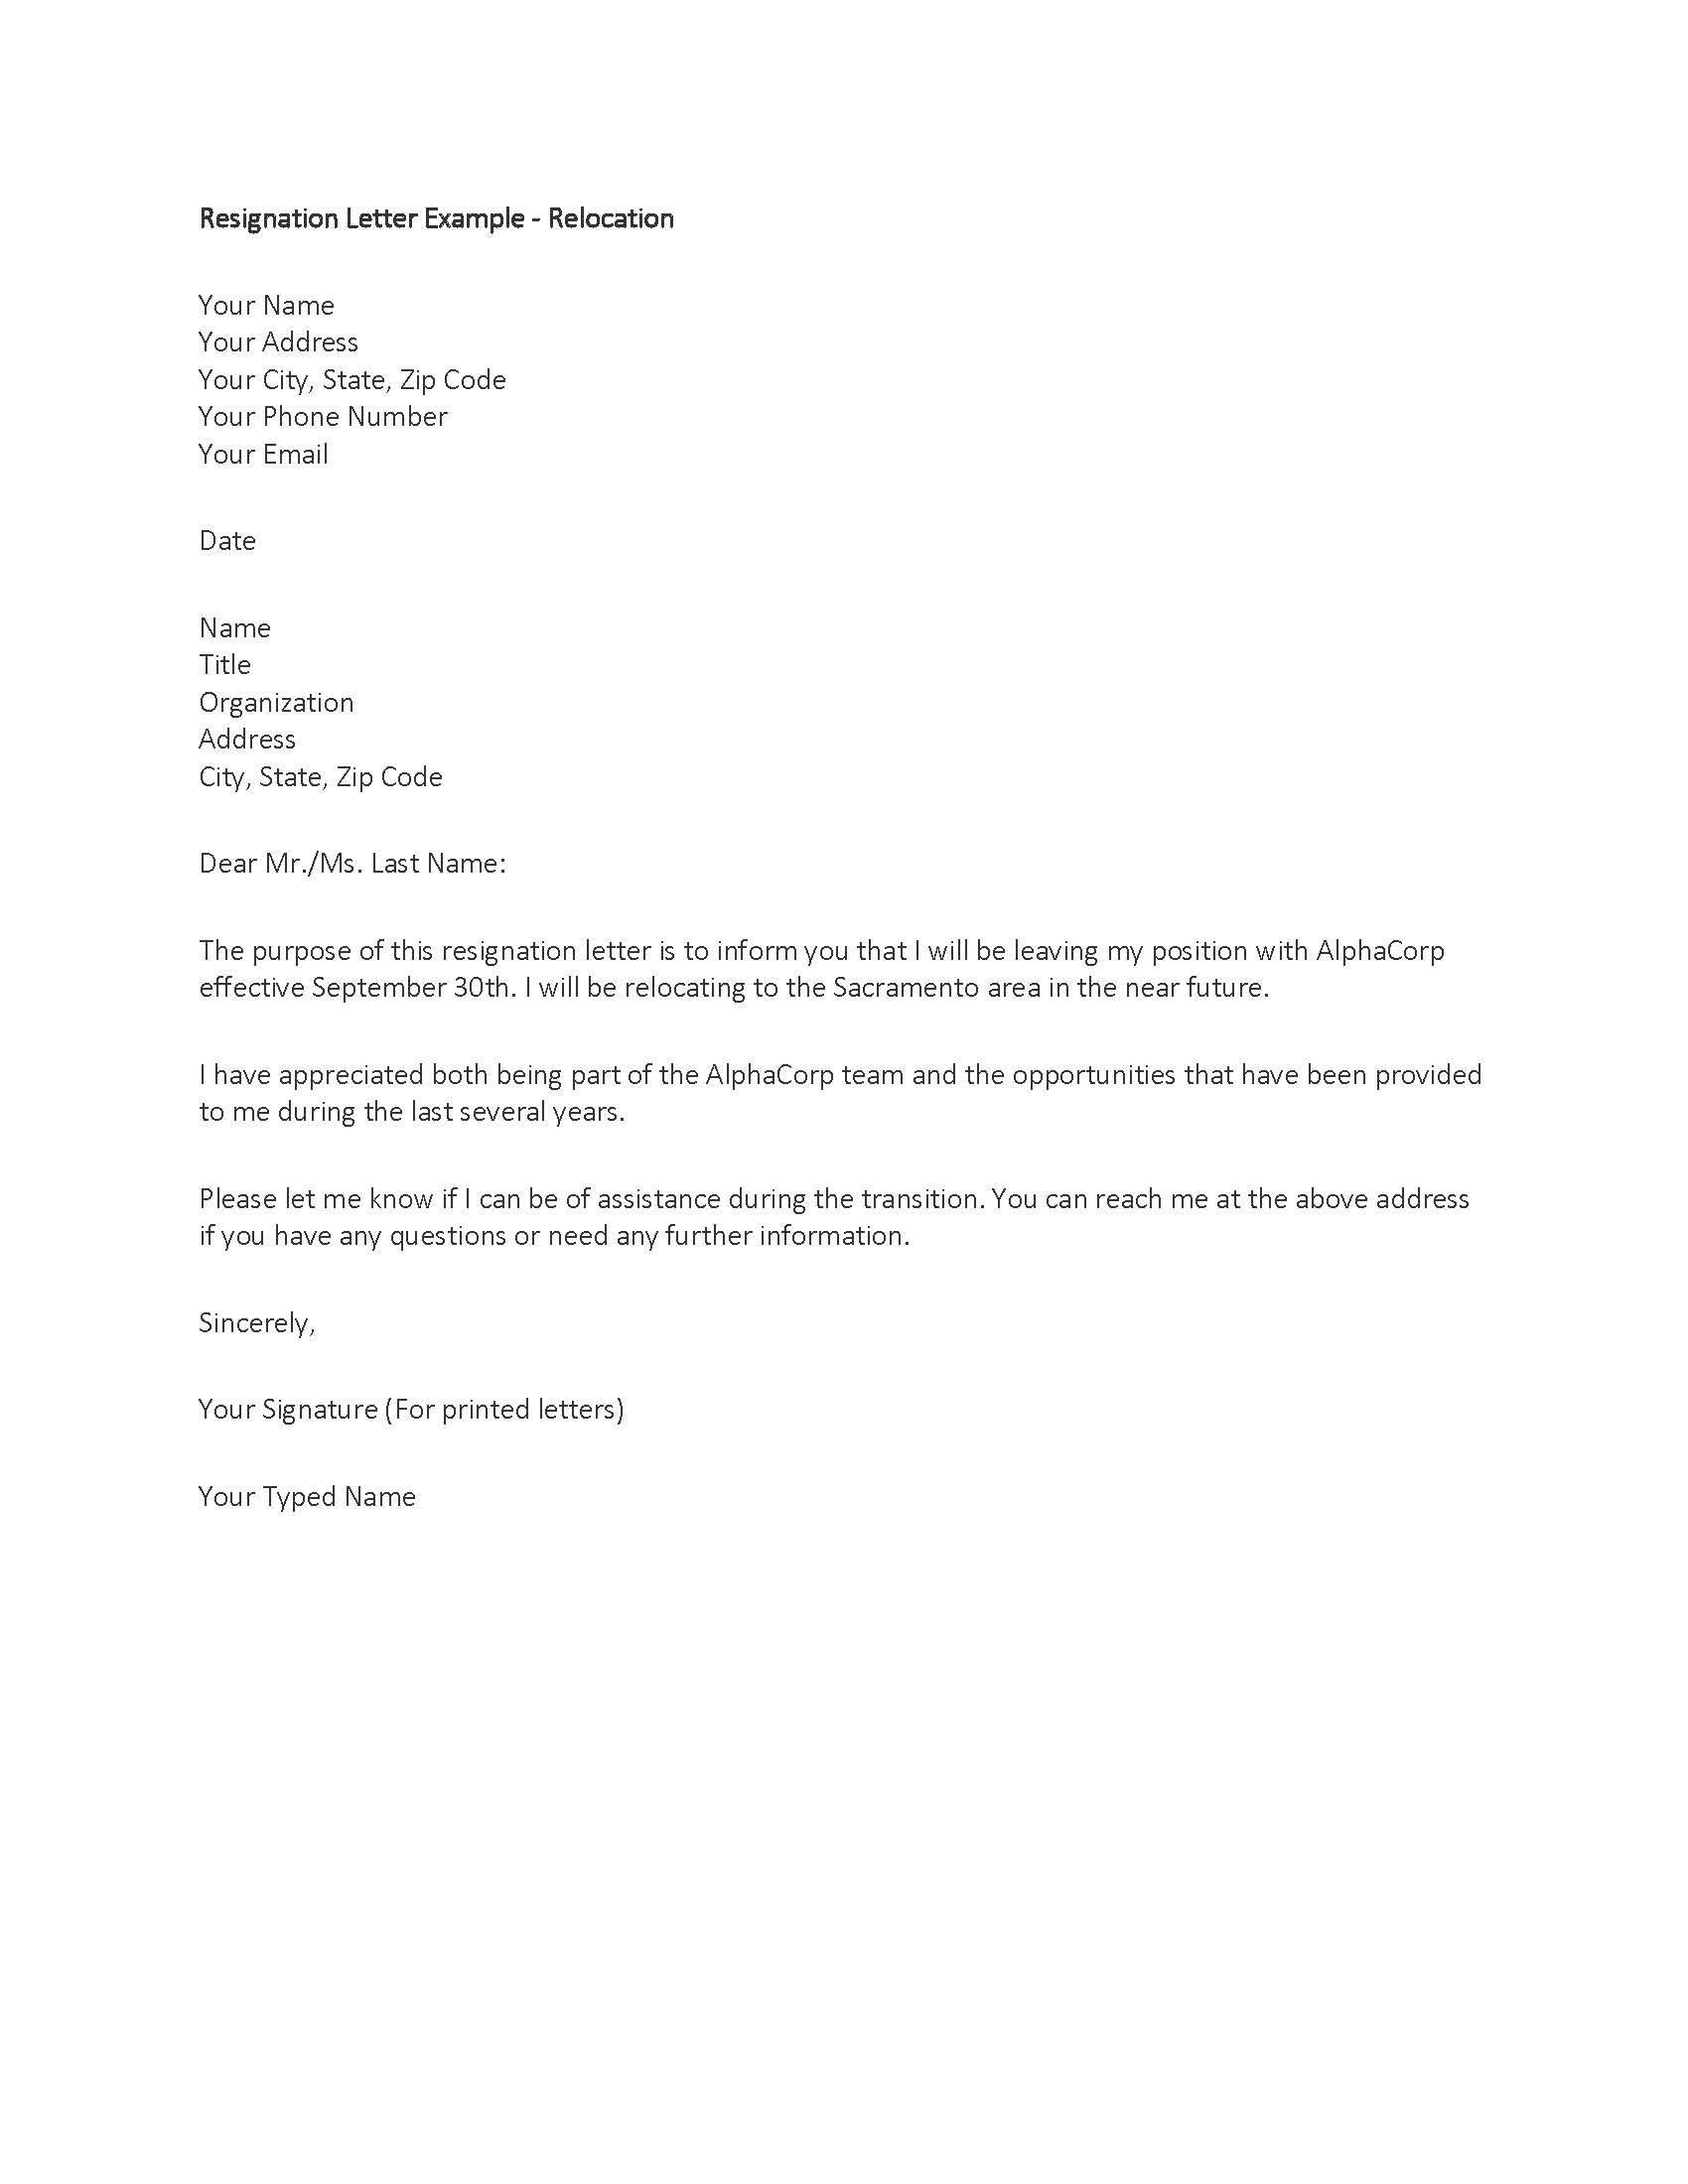 Template Letters Of Resignation. letter of resignation 